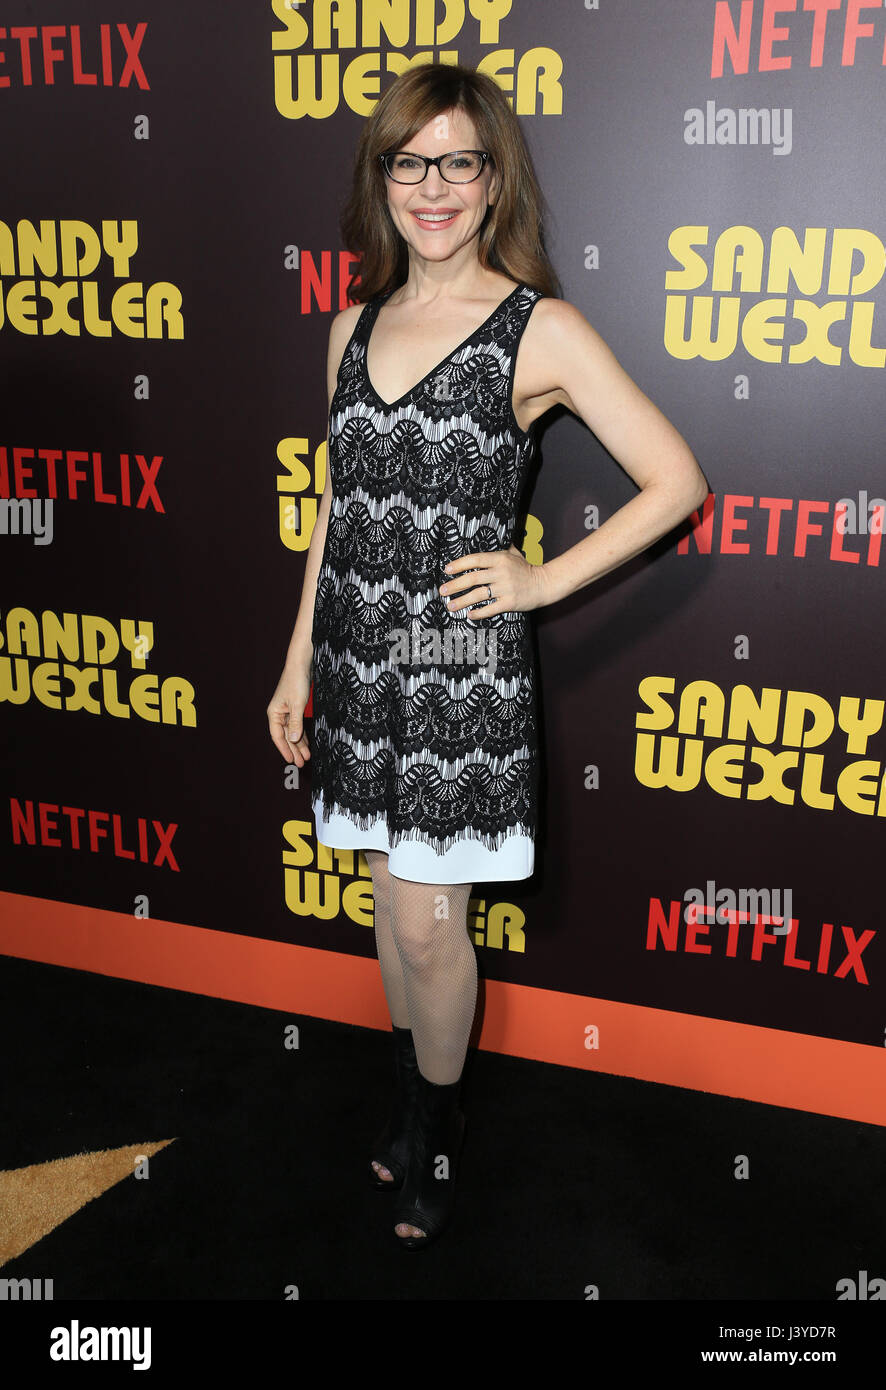 Premiere of Netflix's 'Sandy Wexler' - Arrivals  Featuring: Lisa Loeb Where: Hollywood, California, United States When: 06 Apr 2017 Credit: FayesVision/WENN.com Stock Photo